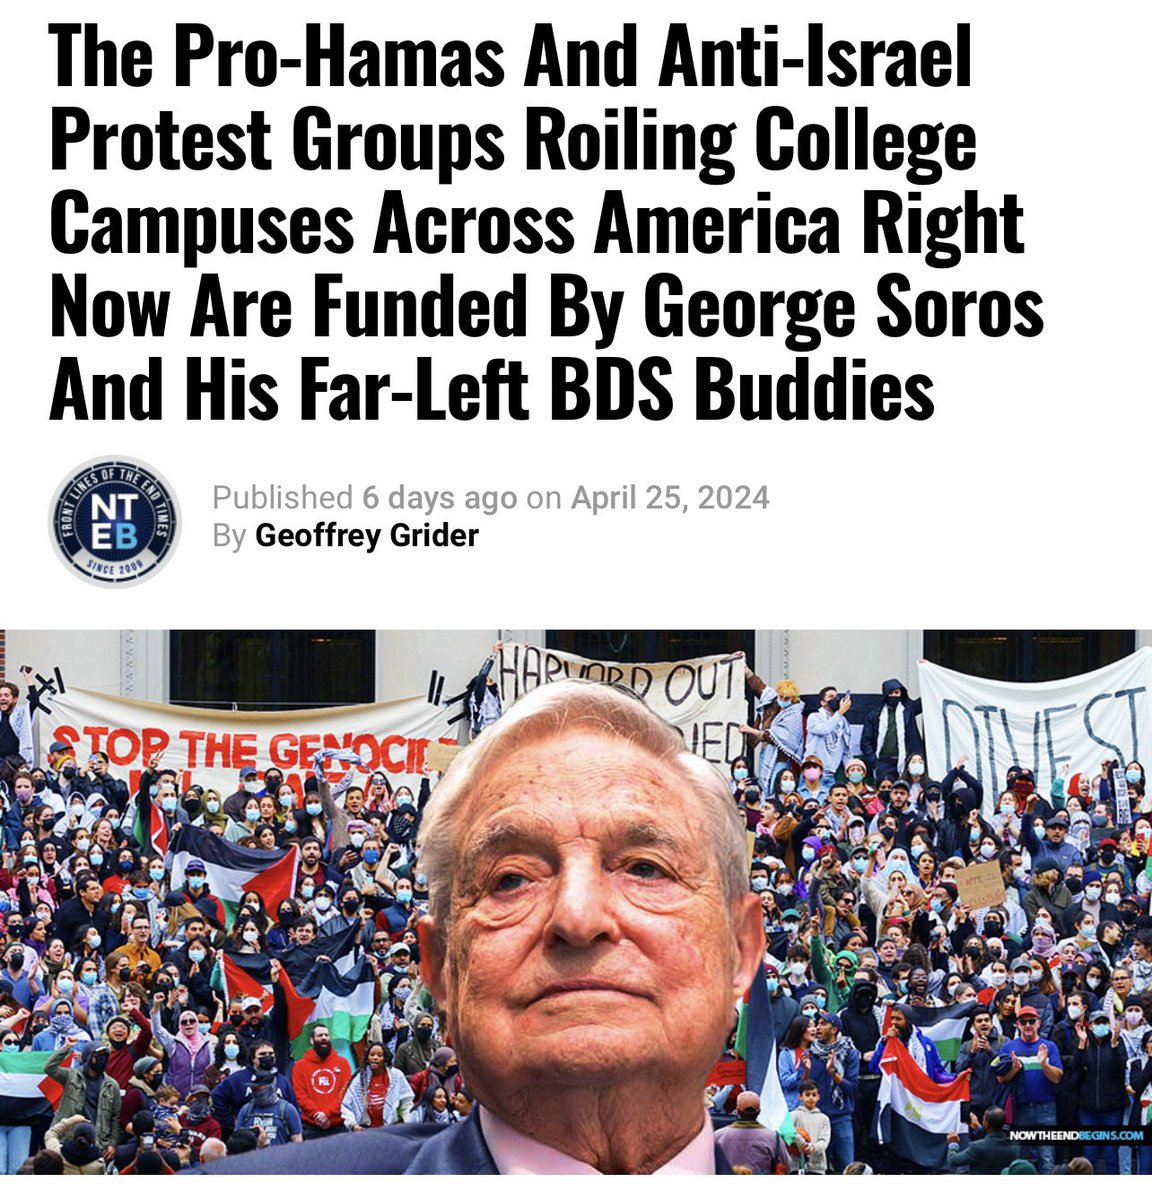 FOLLOW THE MONEY IT’S ALL ORCHESTRATED Paid pro-Hamas directed college activists have been reportedly incentivised to organise campaigns led by Palestinian groups, receiving financial support ranging from $2,880 to $7,800 per person plus pizza & rotisserie chicken deliveries